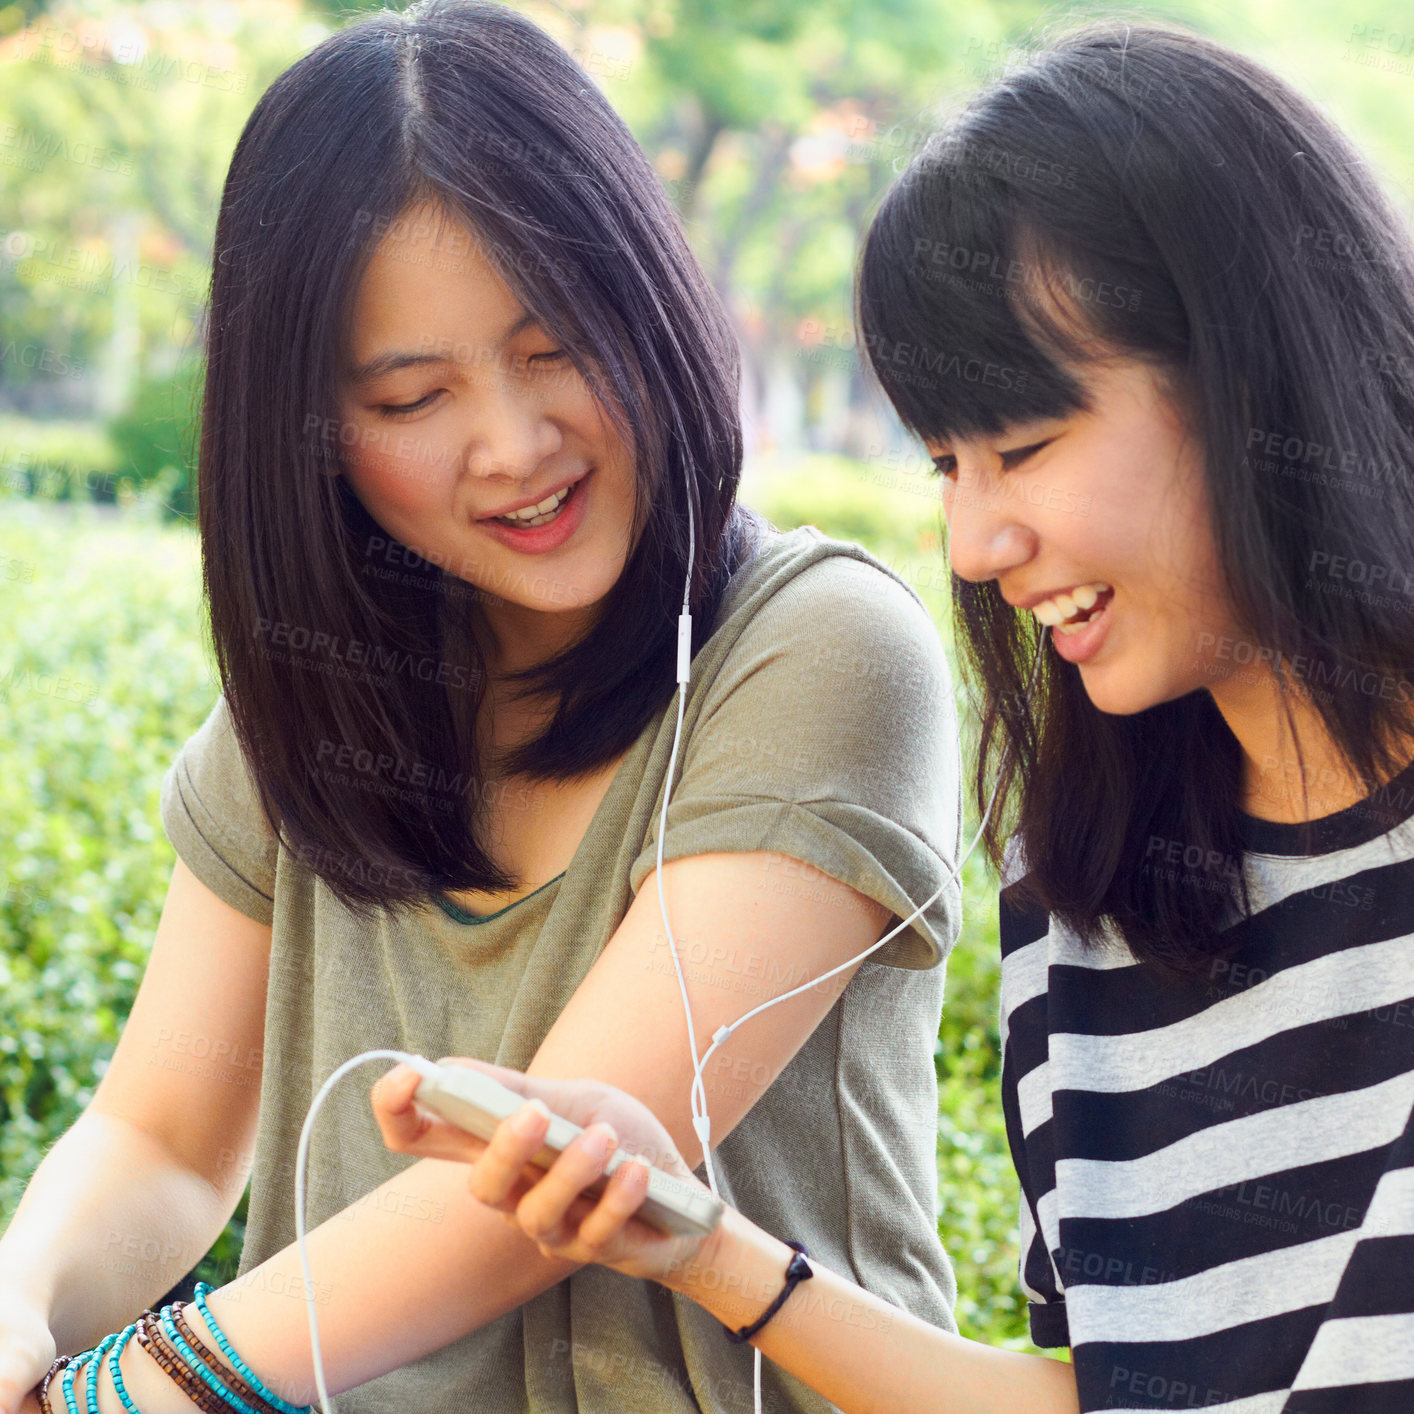 Buy stock photo Asian women, students together and earphones with comic laugh, funny music video and meme at campus. Japanese girl, friends and audio streaming with smartphone, sharing and listen with smile in park